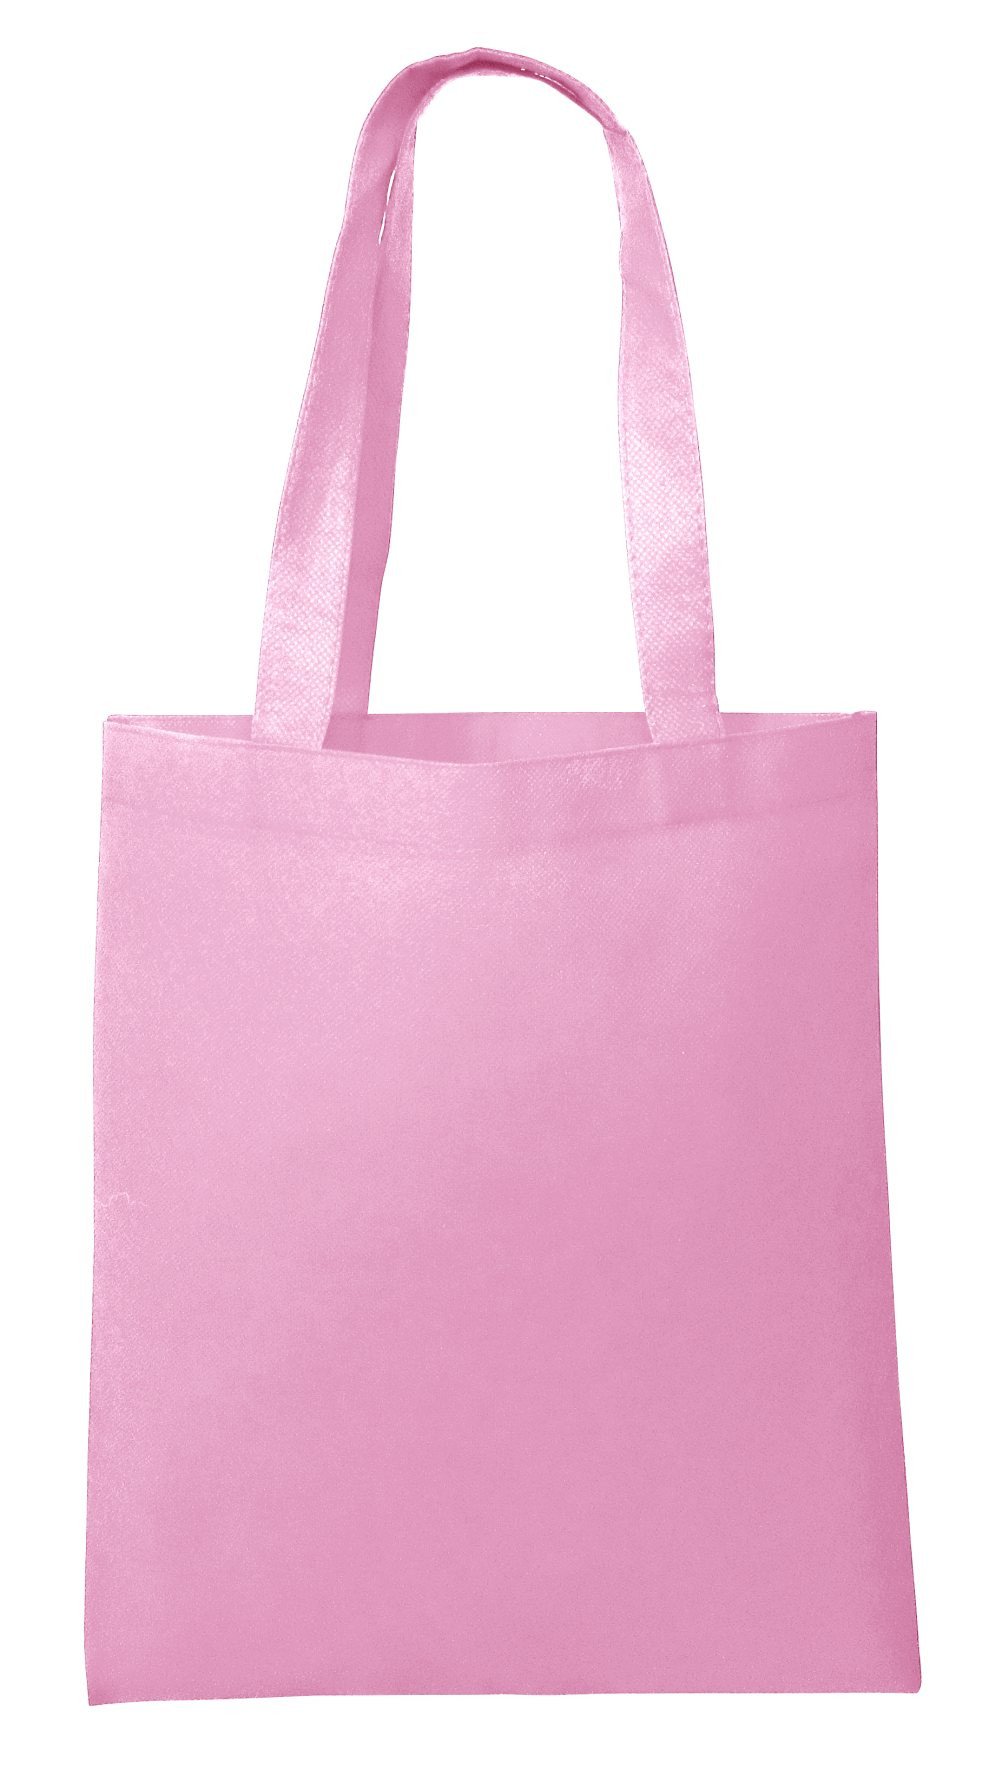 Cheap Promotional Tote Bags pink